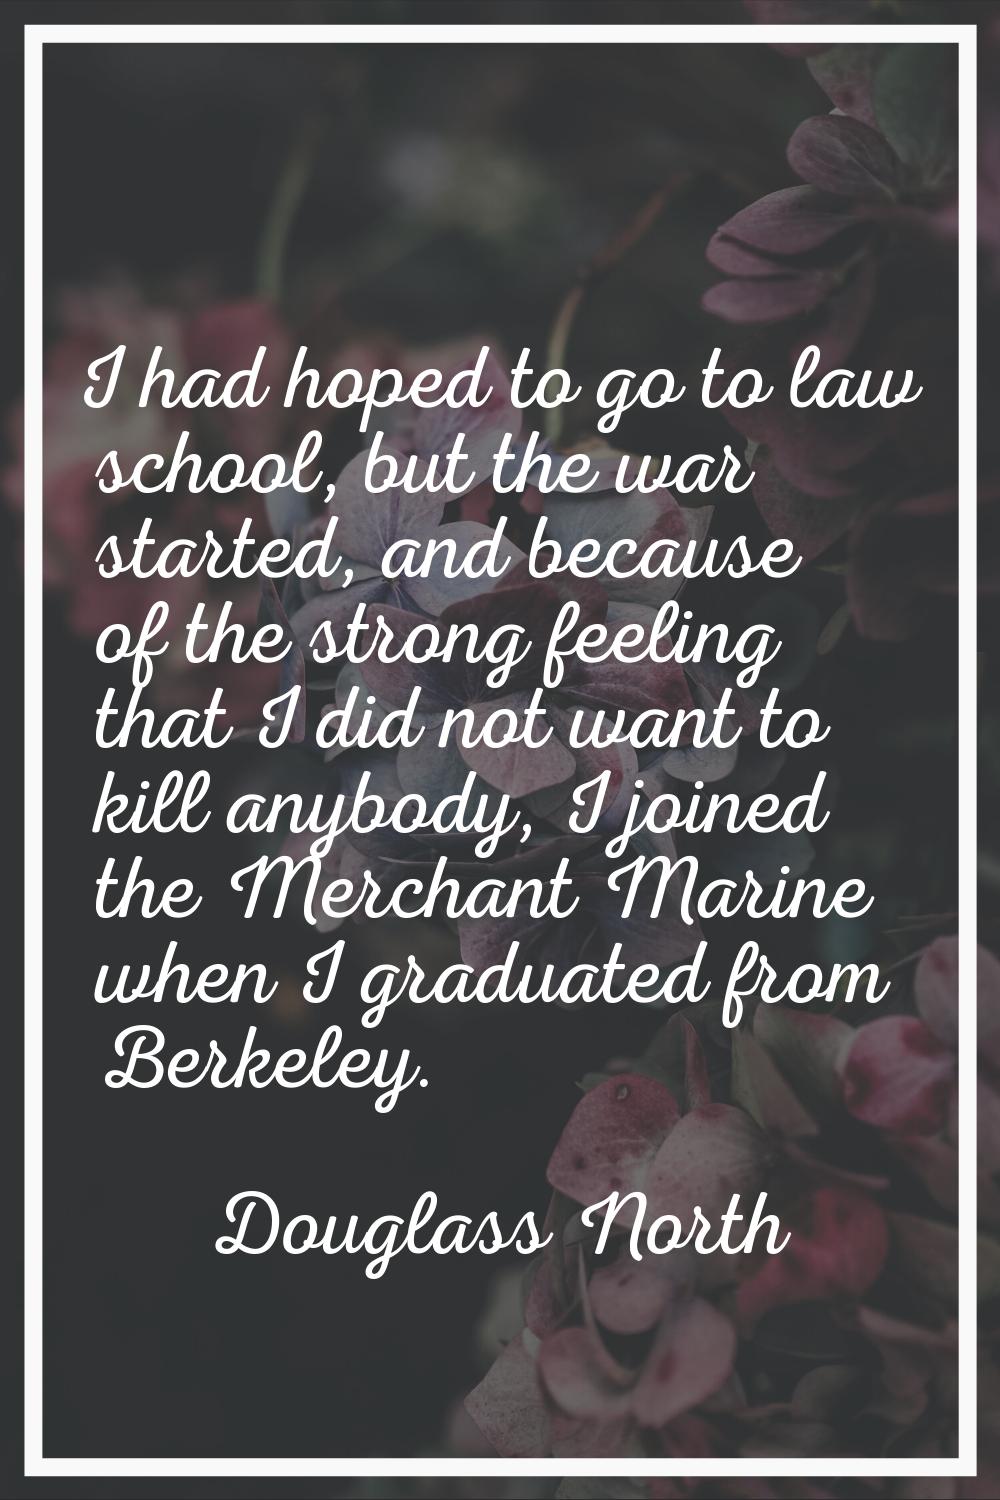 I had hoped to go to law school, but the war started, and because of the strong feeling that I did 